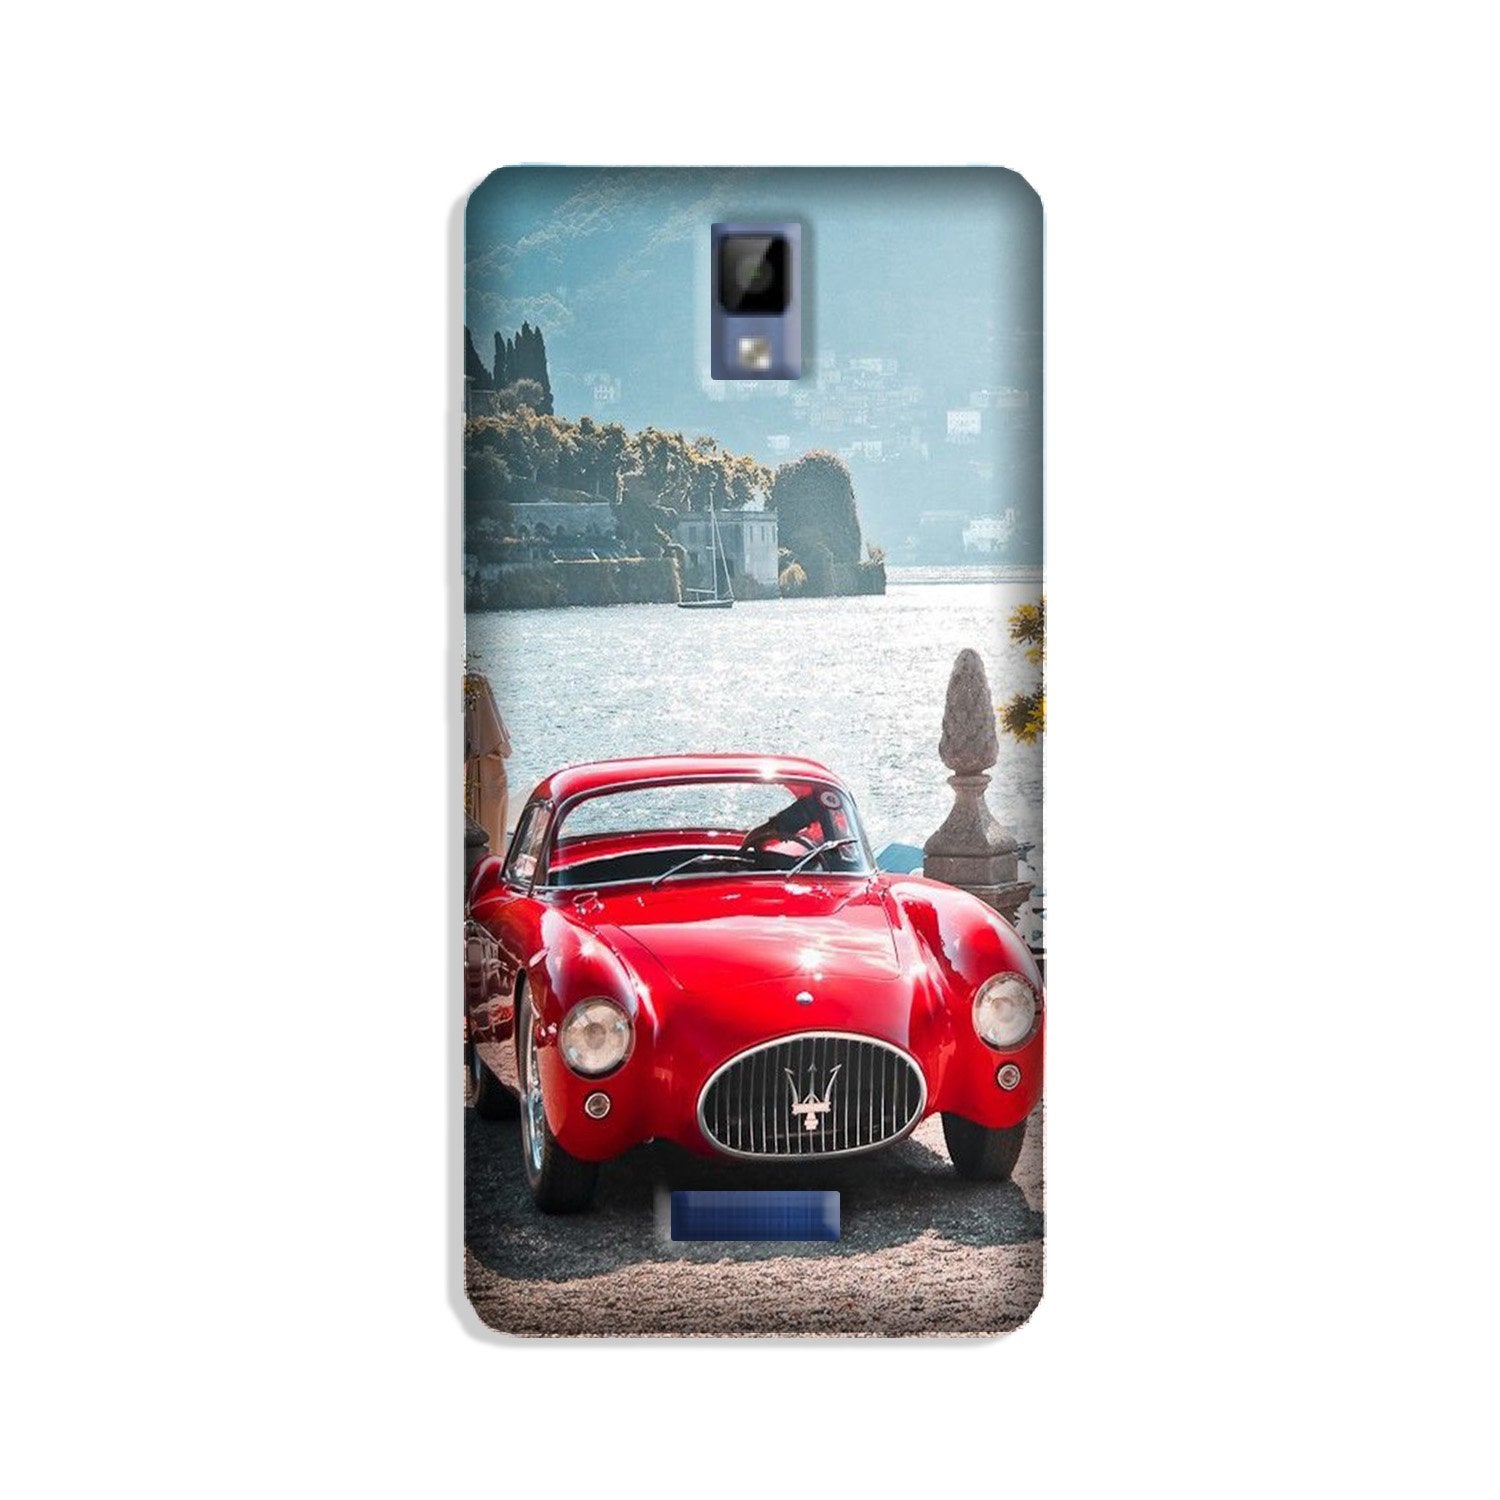 Vintage Car Case for Gionee P7